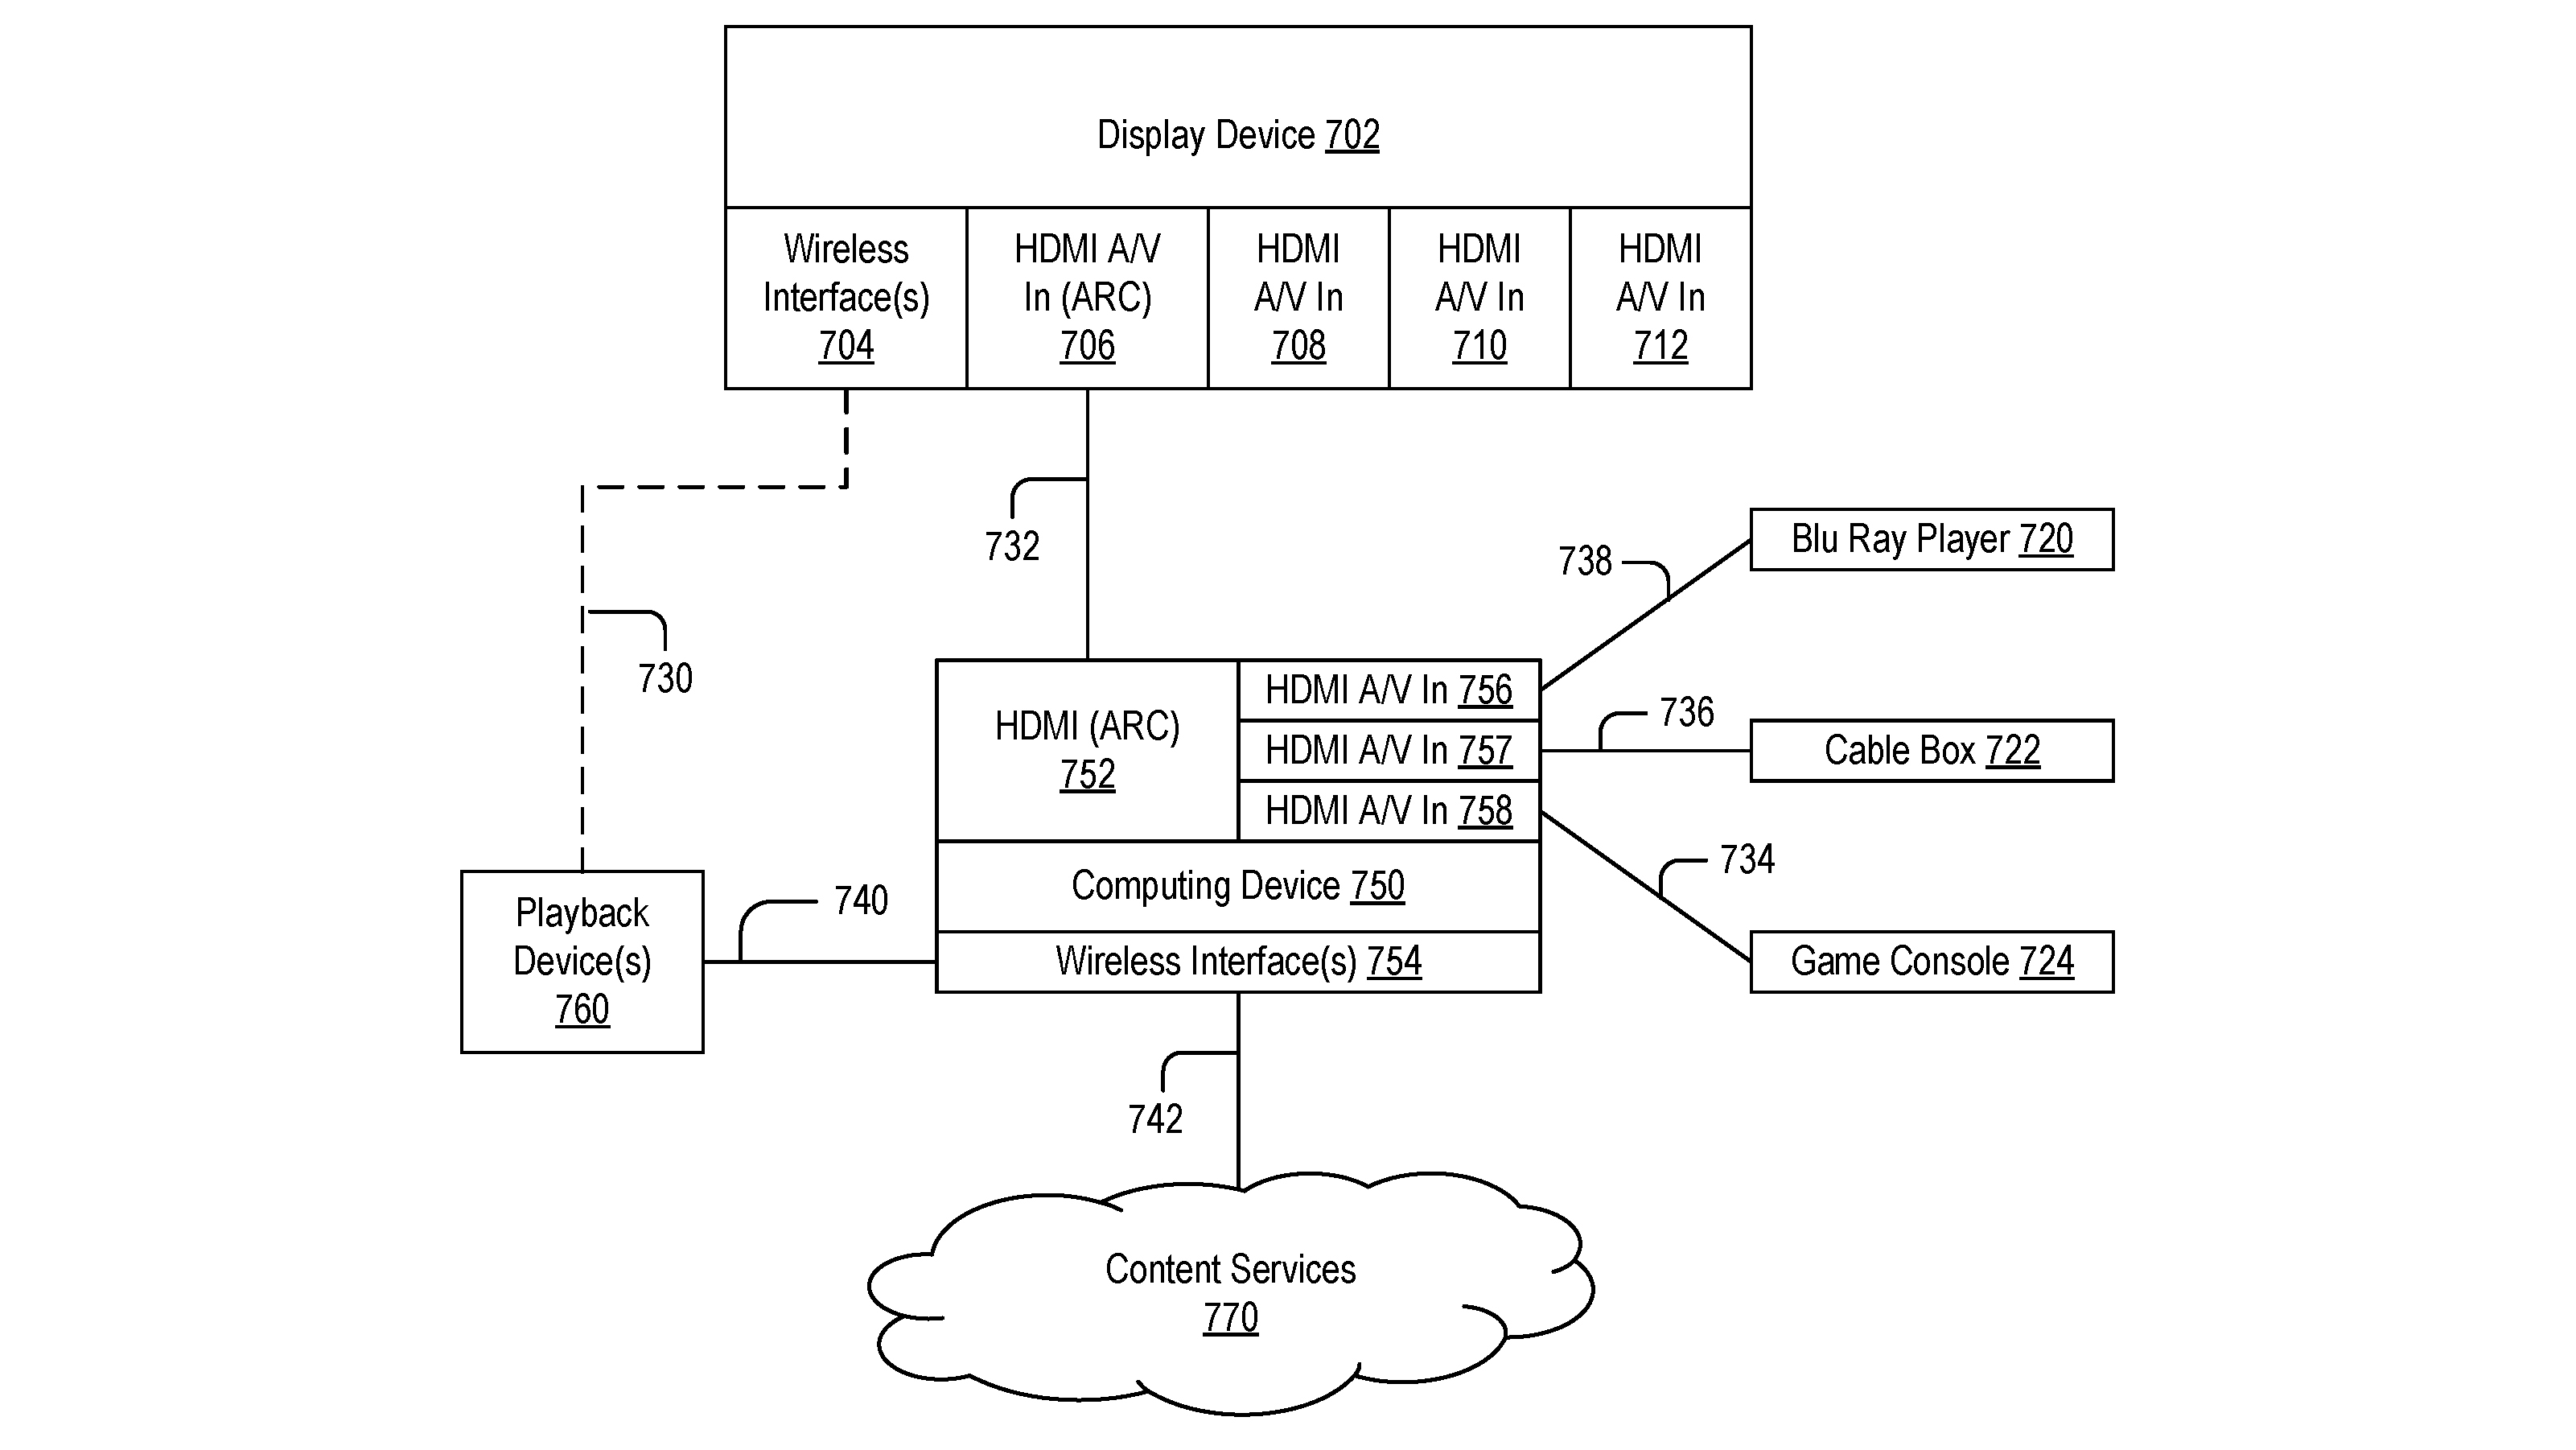 Sonos TV patent image showing HDMI connections and devices